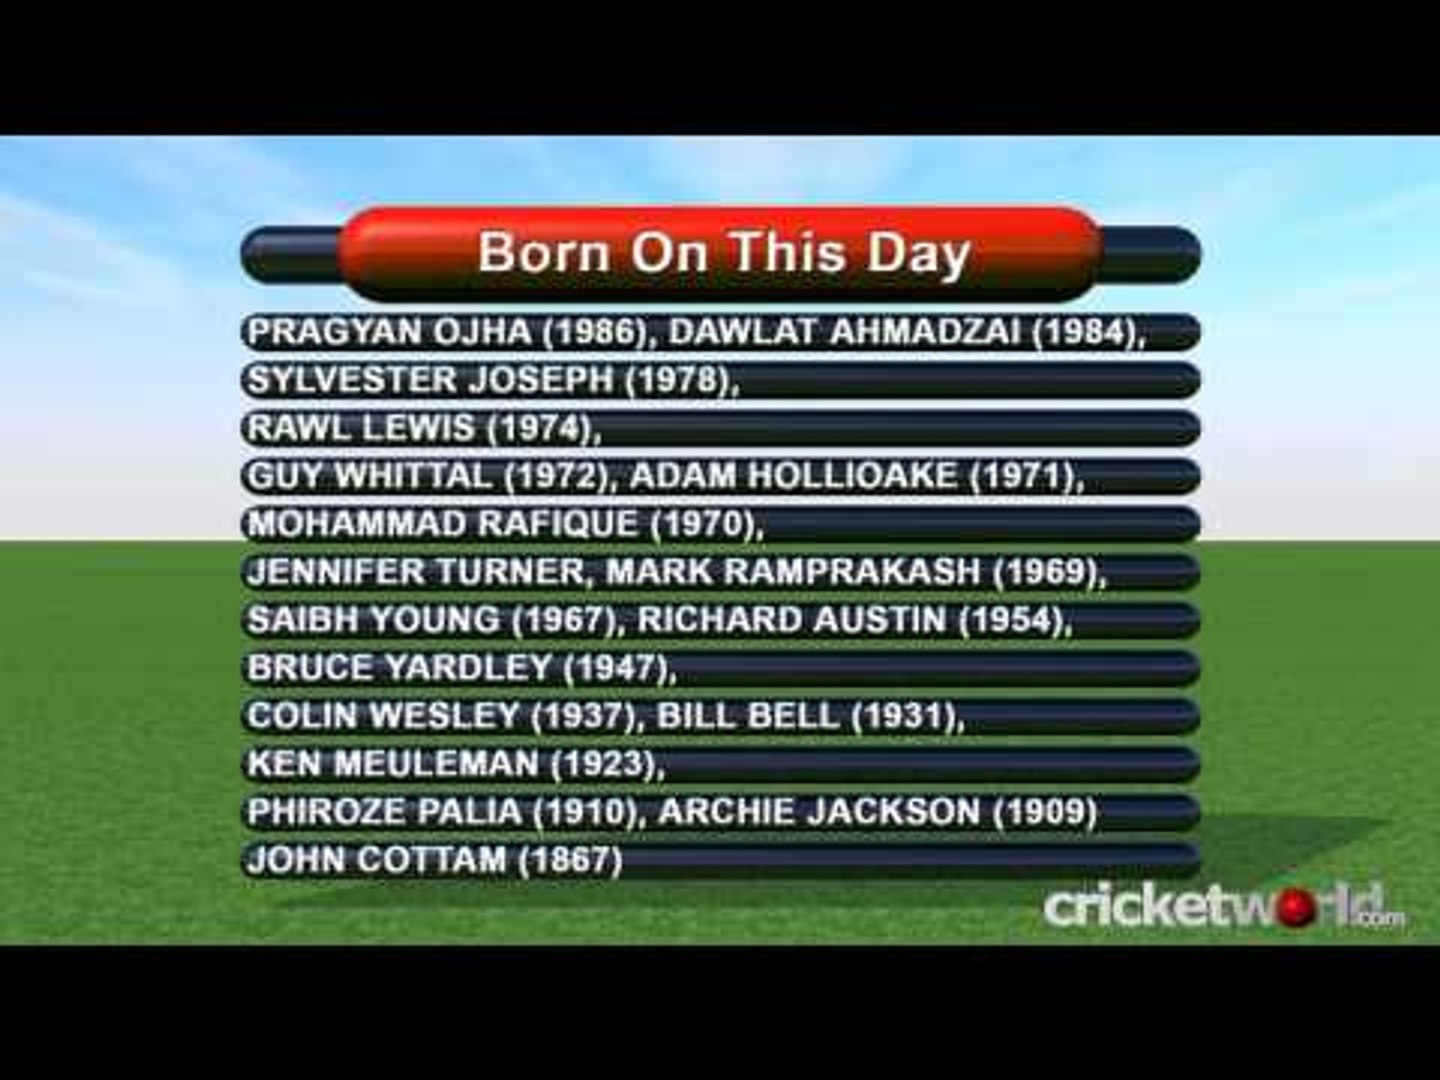 Cricket Video News - On This Day - 5th September - Khan, Vaughan - Cricket World TV